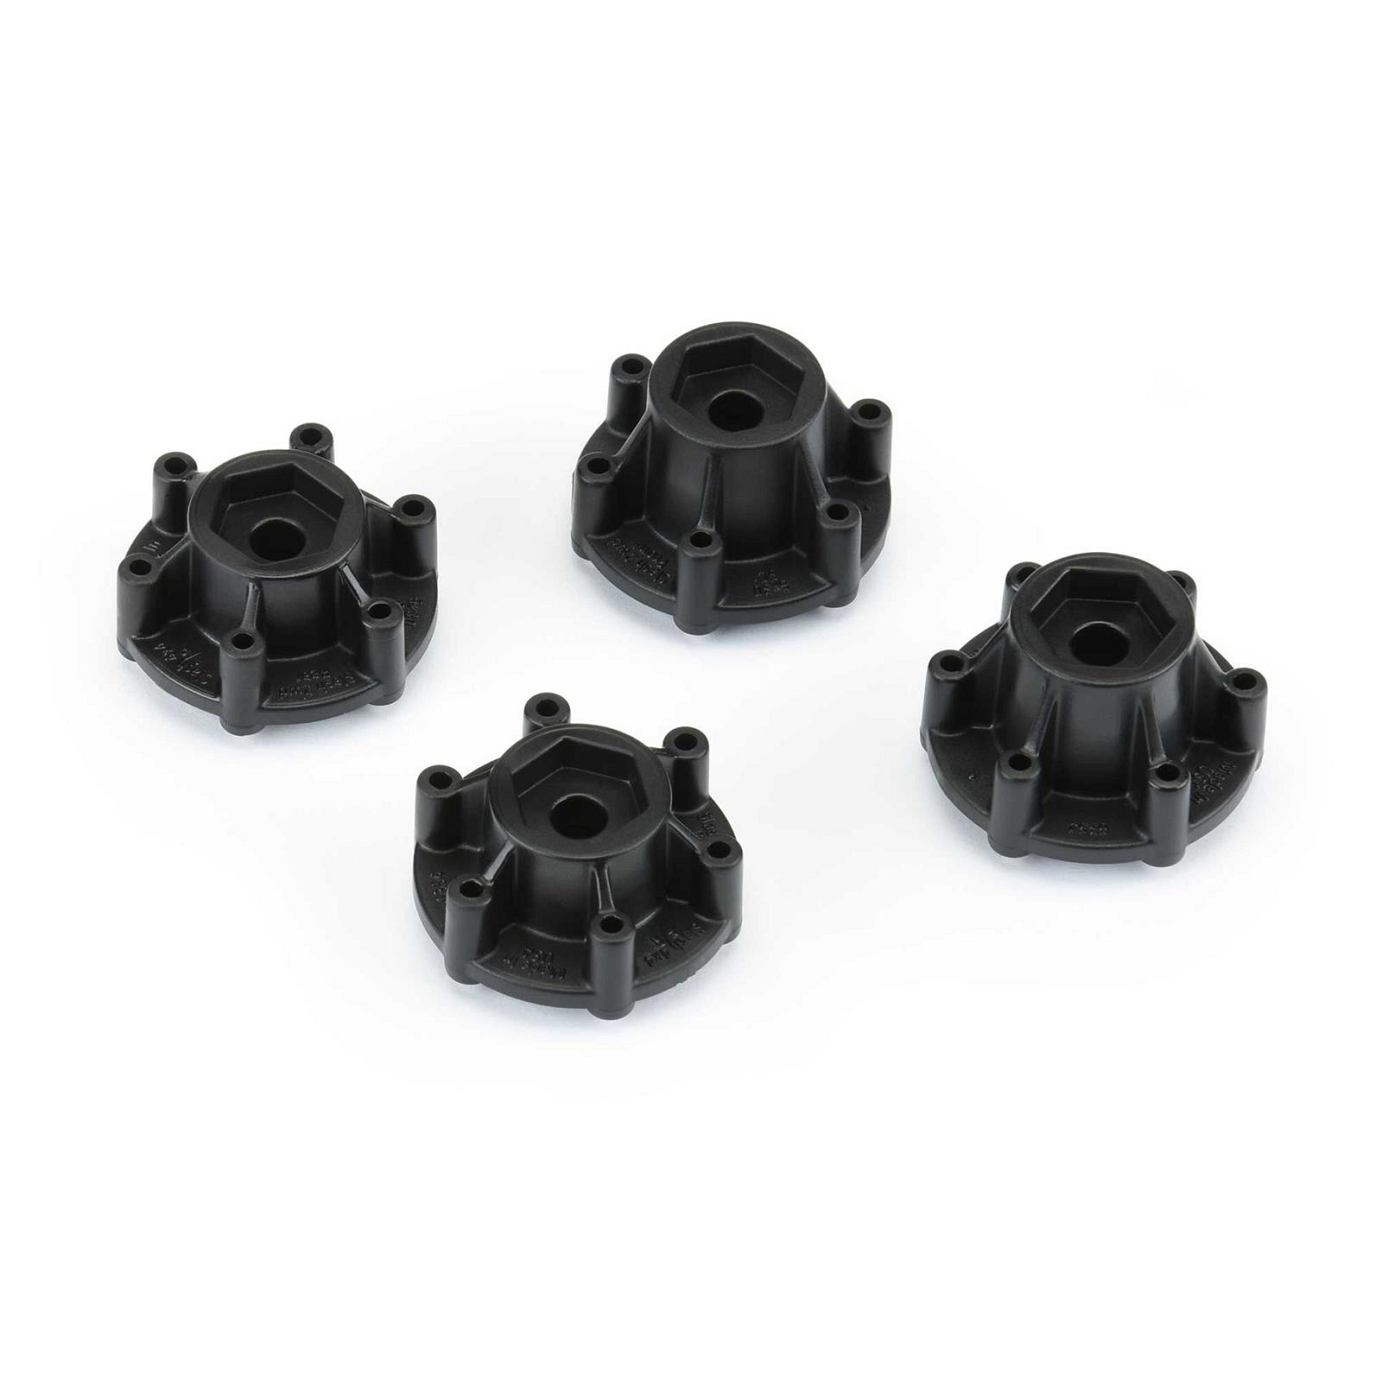 Proline 6x30 to 12mm Short Course Hex Adapters for 6x30 SCT Whee